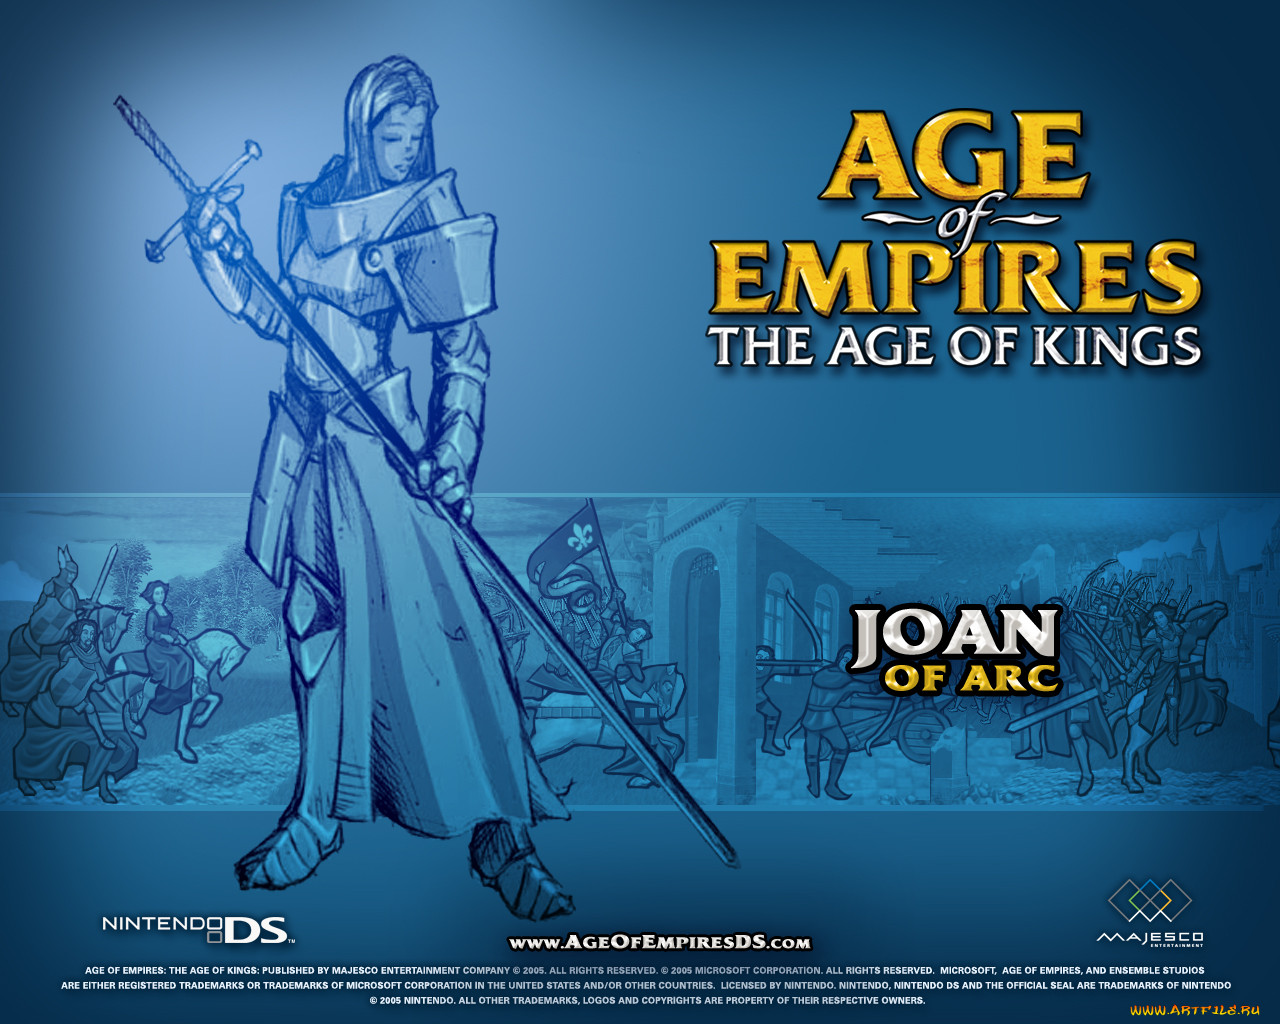 , , age, of, empires, ii, the, kings